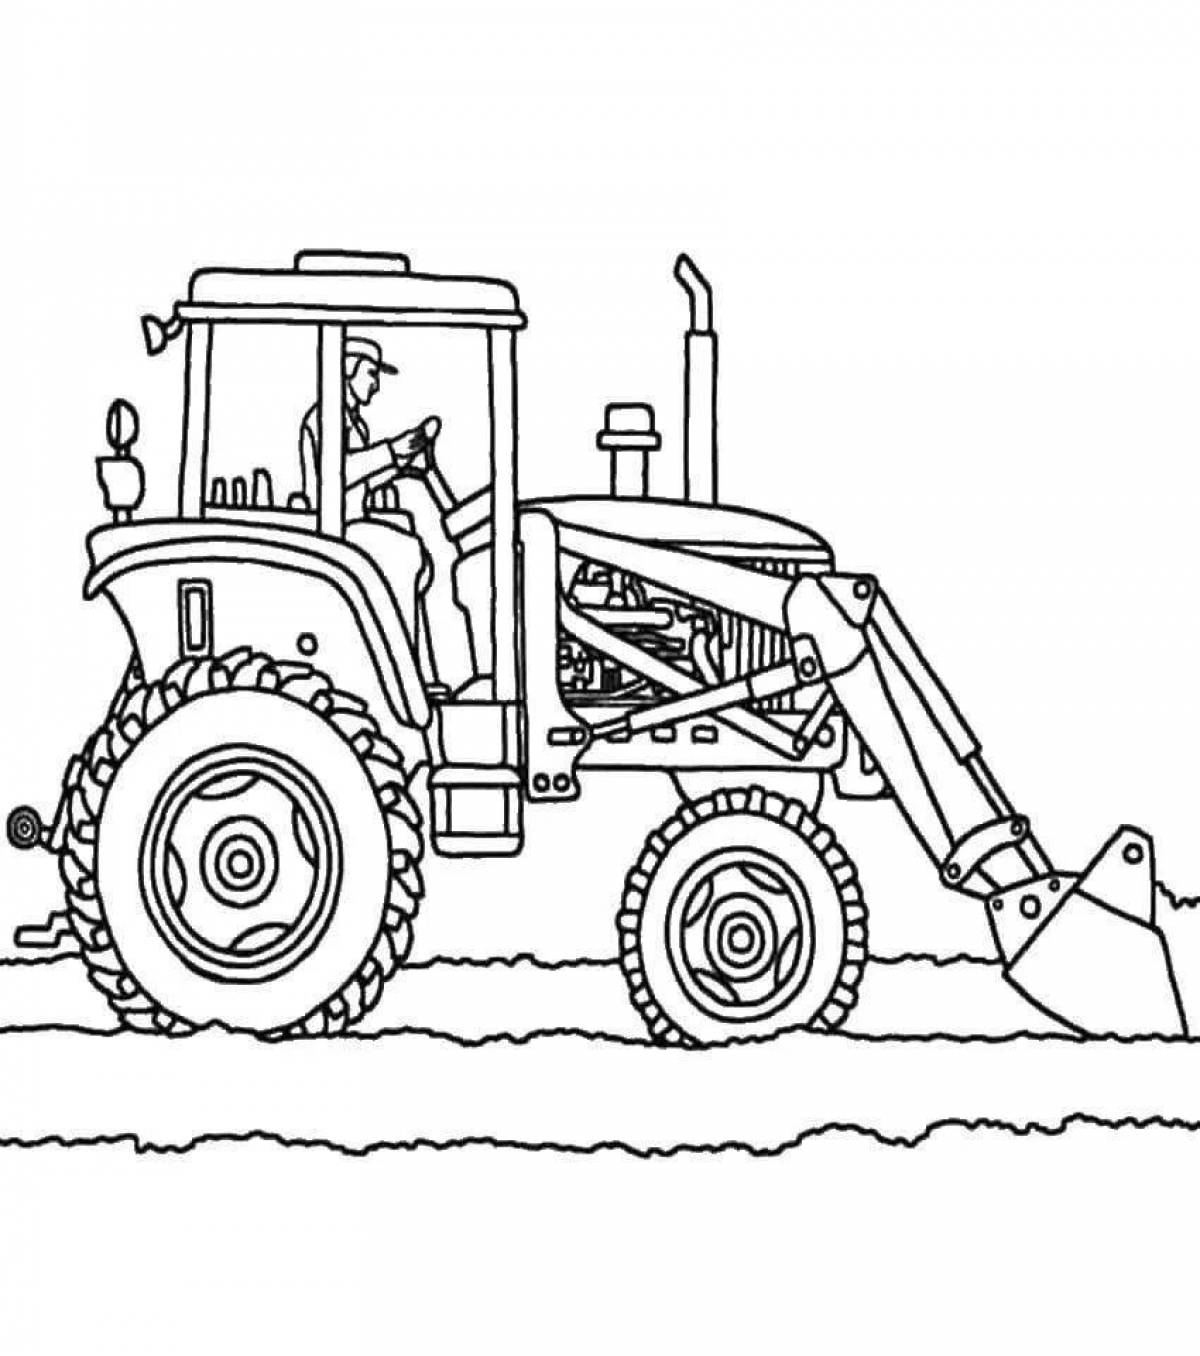 Radiant tractor coloring page